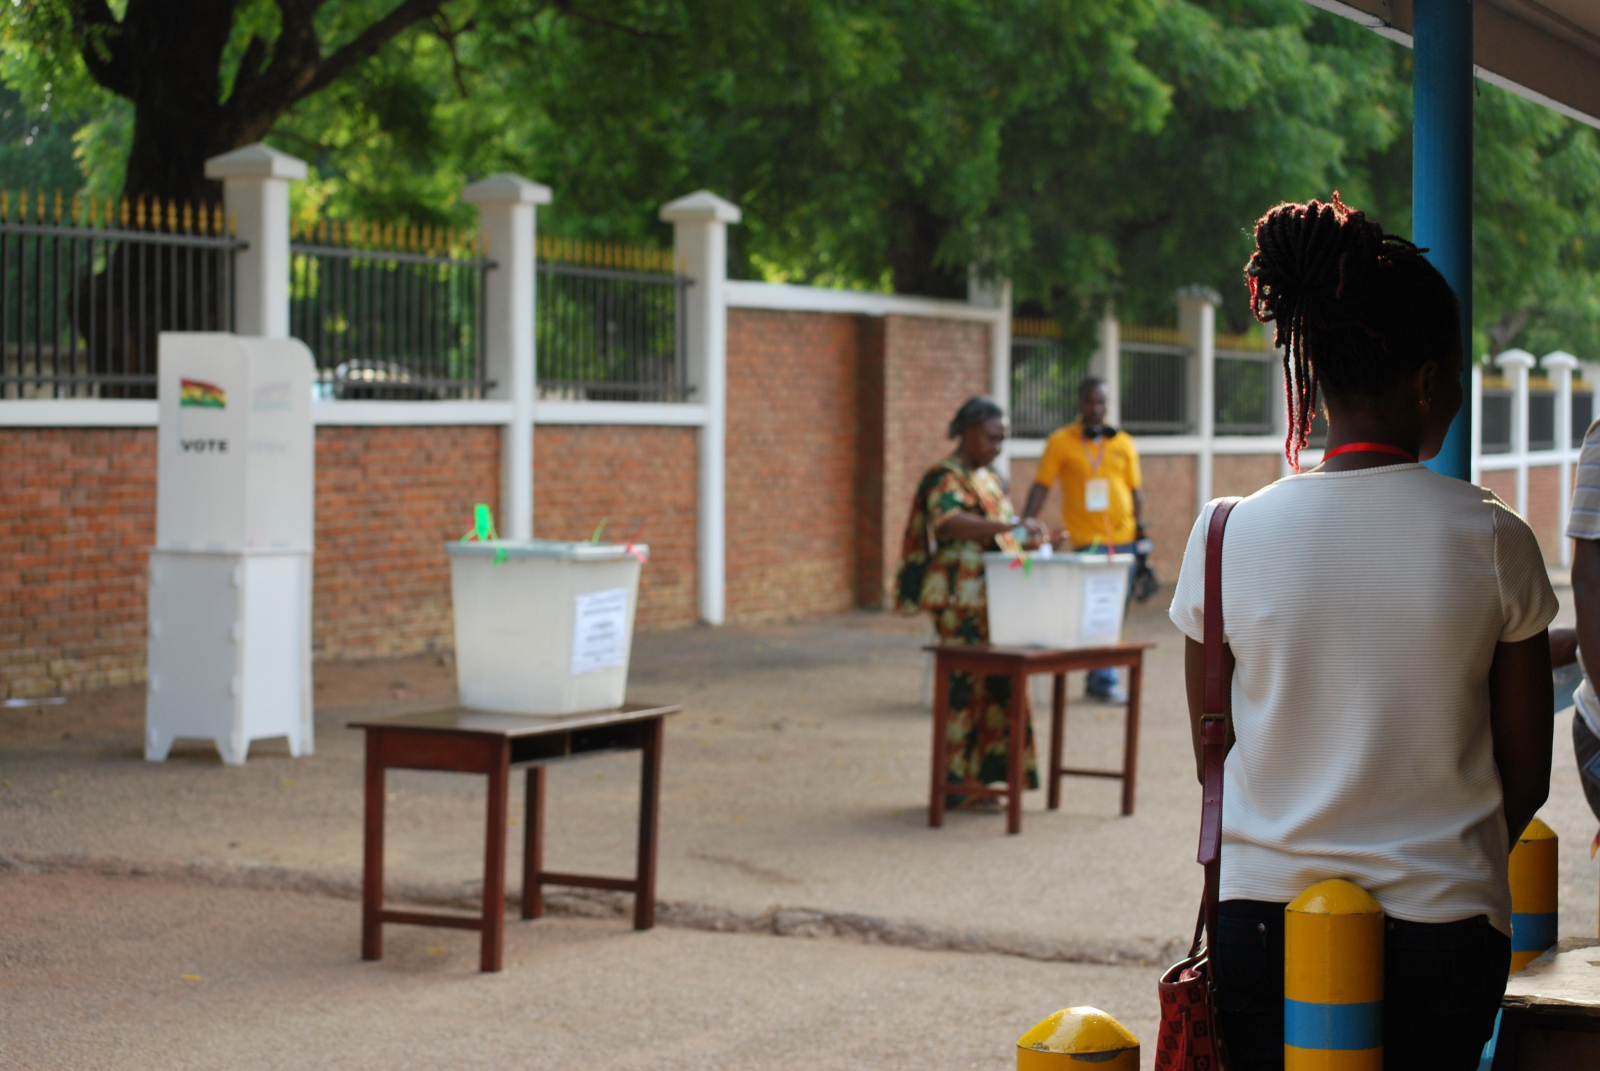 With All Eyes on Ghana, NDI Observers Applaud the Country’s Peaceful Elections